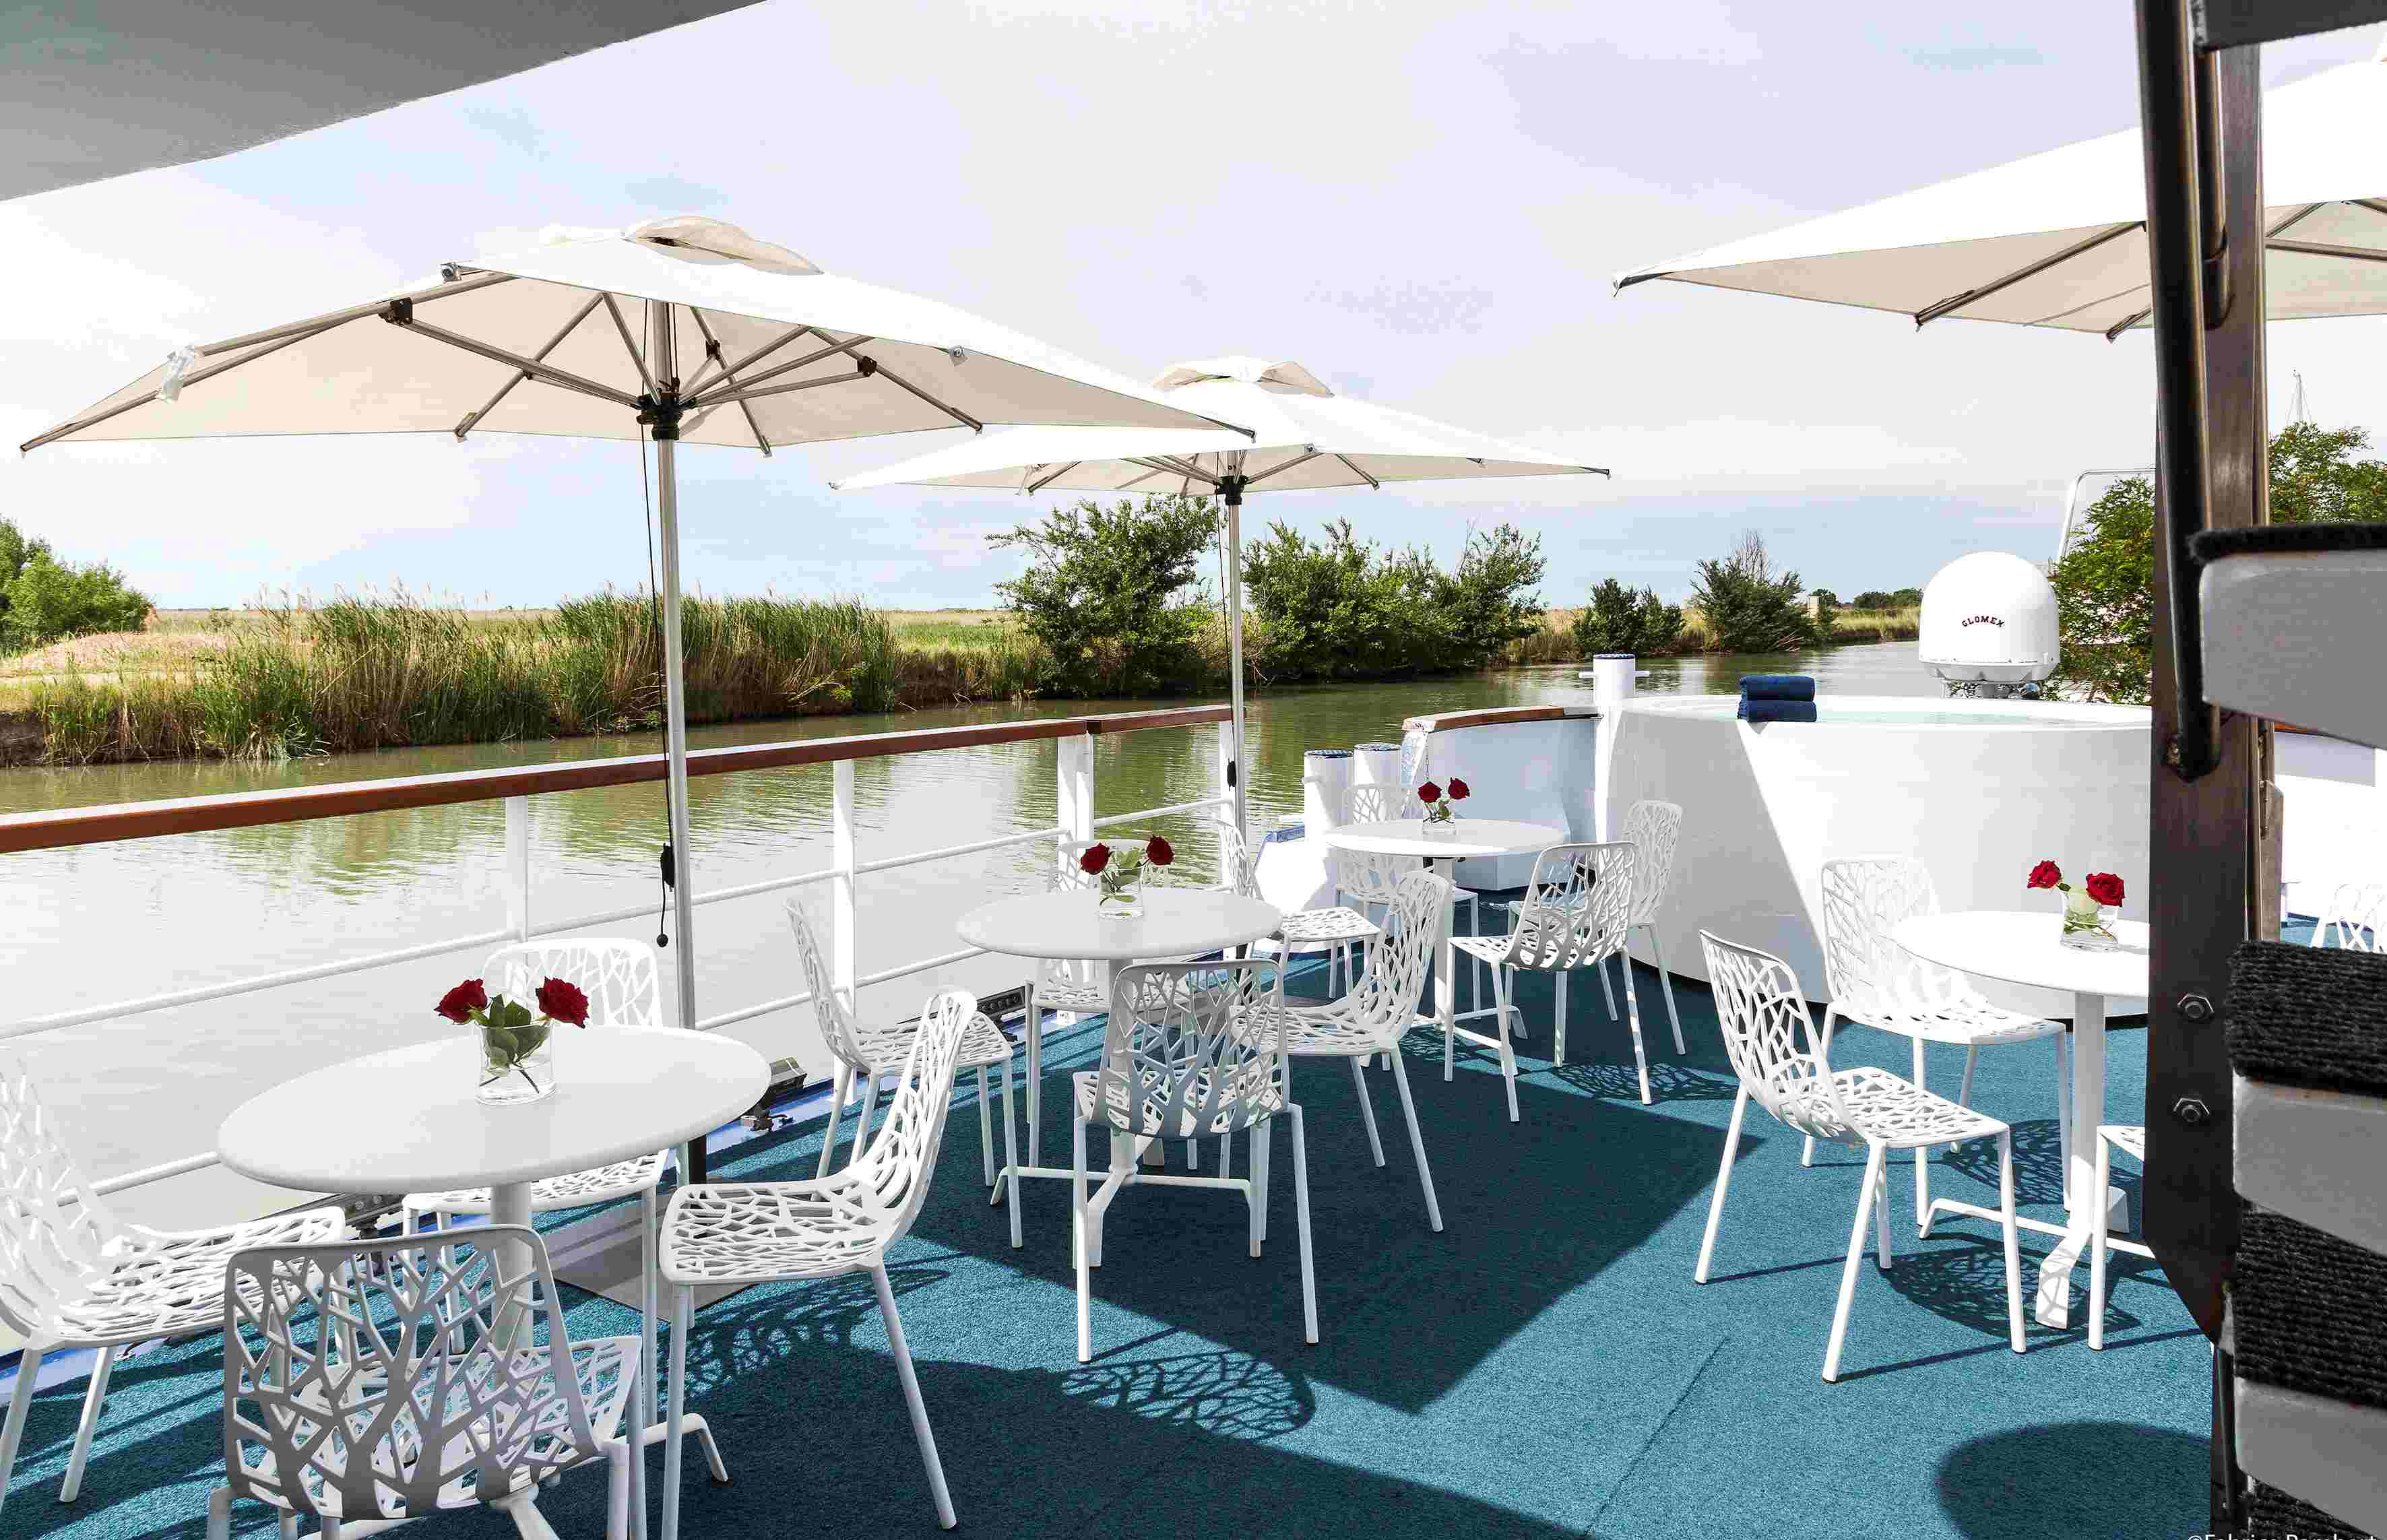 Sun deck onboard CroisiEurope barge (Image: Courtesy of CroisiEurope)